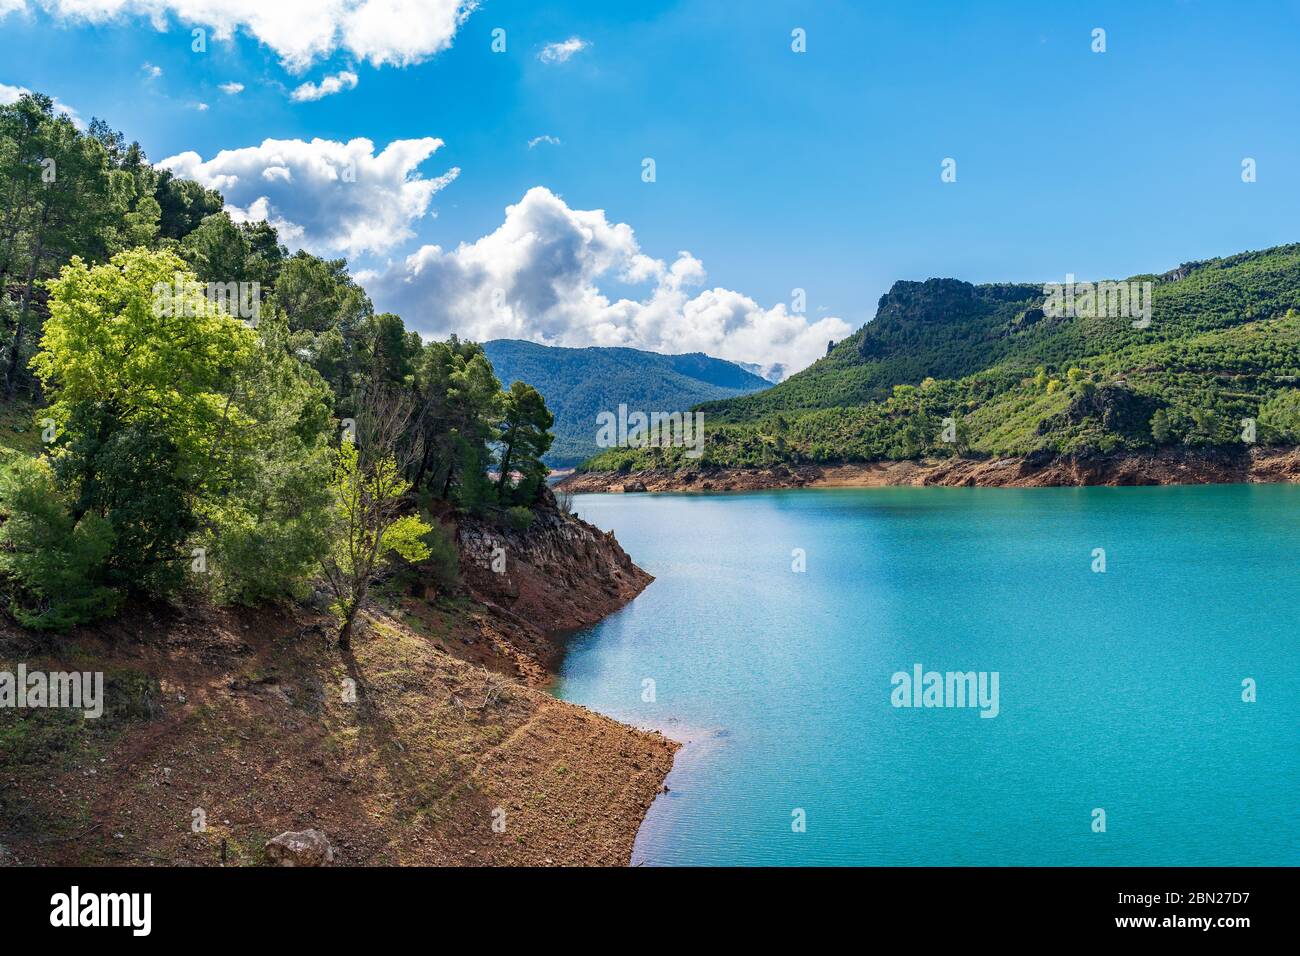 Landscape of a lake (reservoir) in the mountains. Cazorla, Spain. Stock Photo